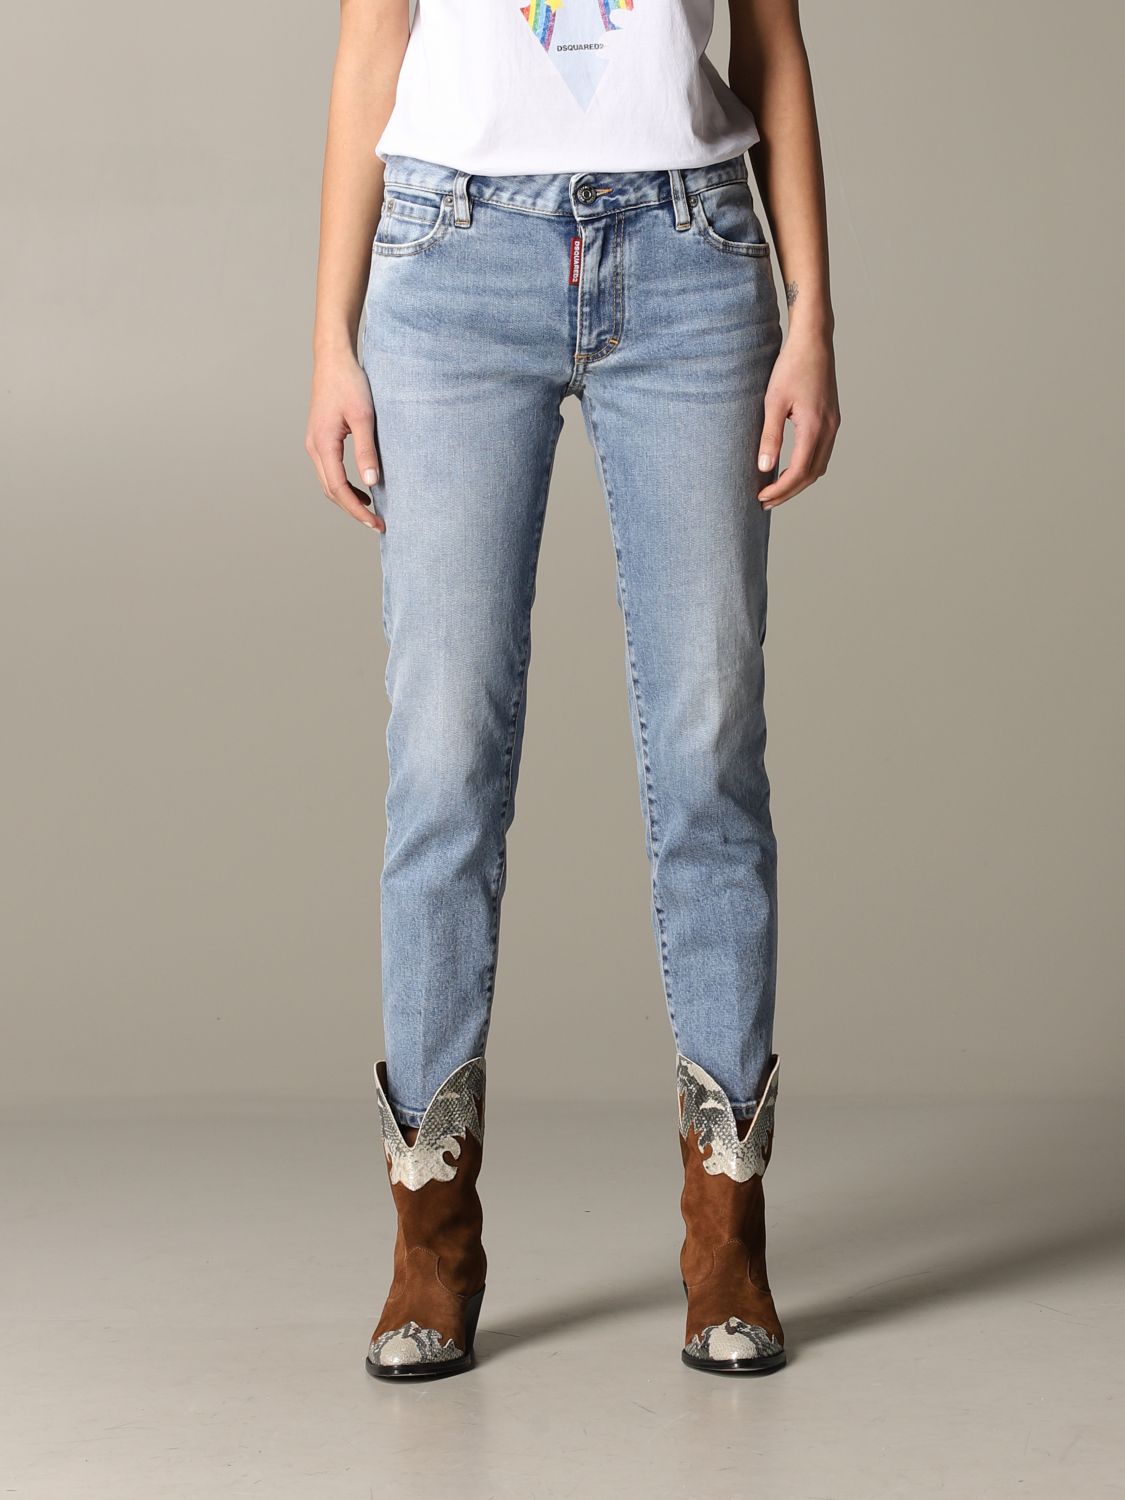 dsquared2 jeans womens outlet